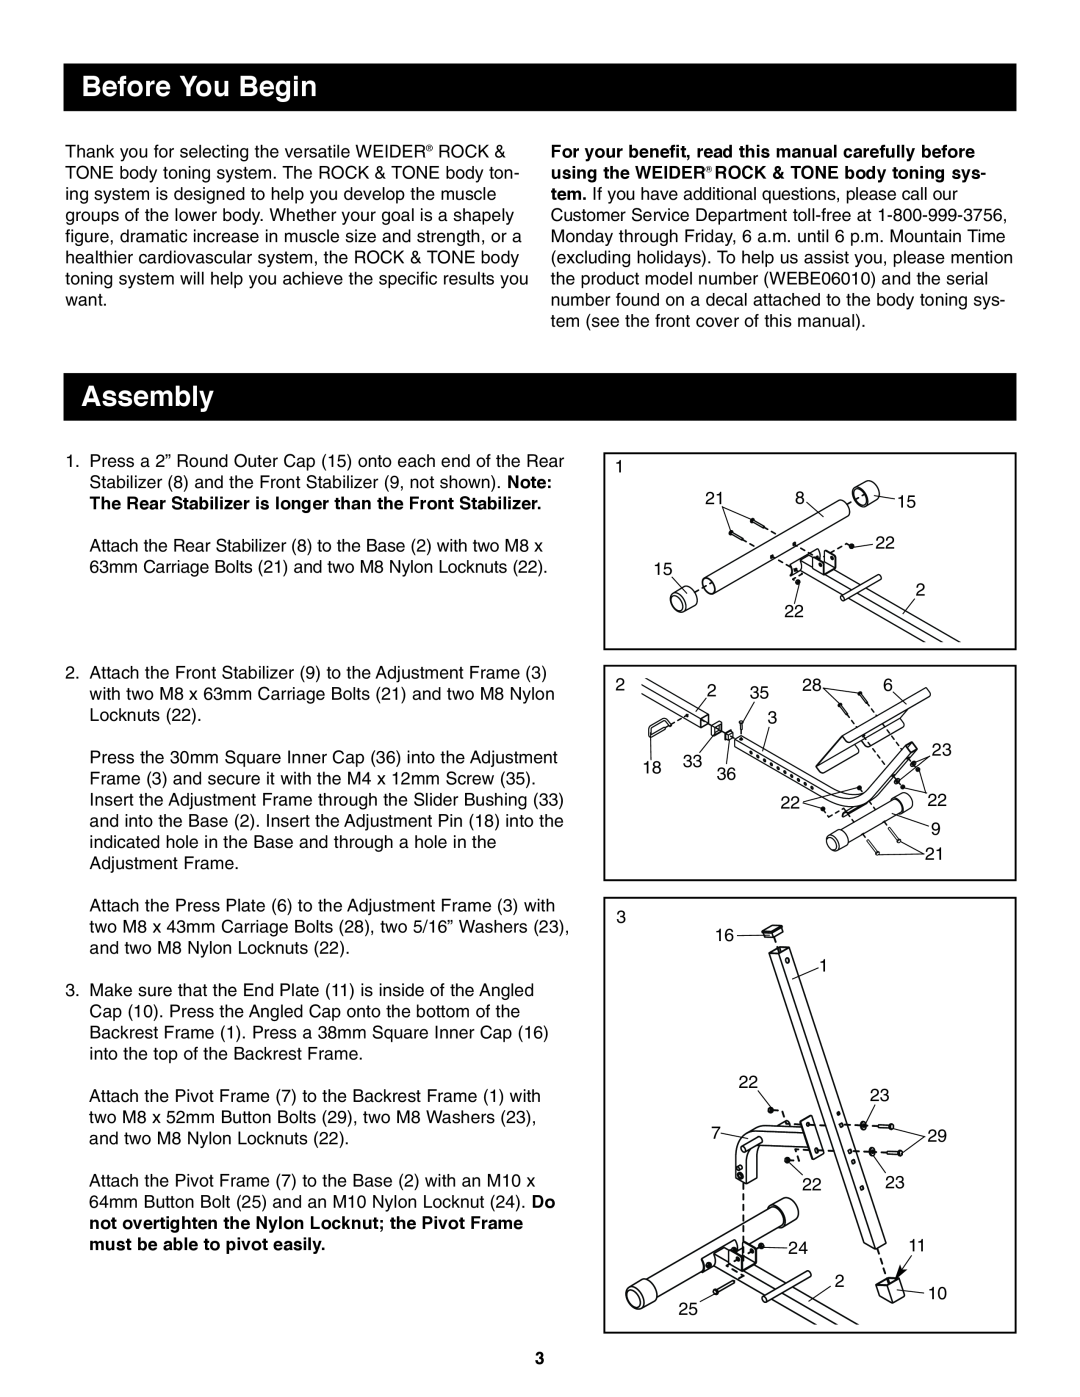 Weider WEBE06010 user manual Before You Begin, Assembly, The Rear Stabilizer is longer than the Front Stabilizer 